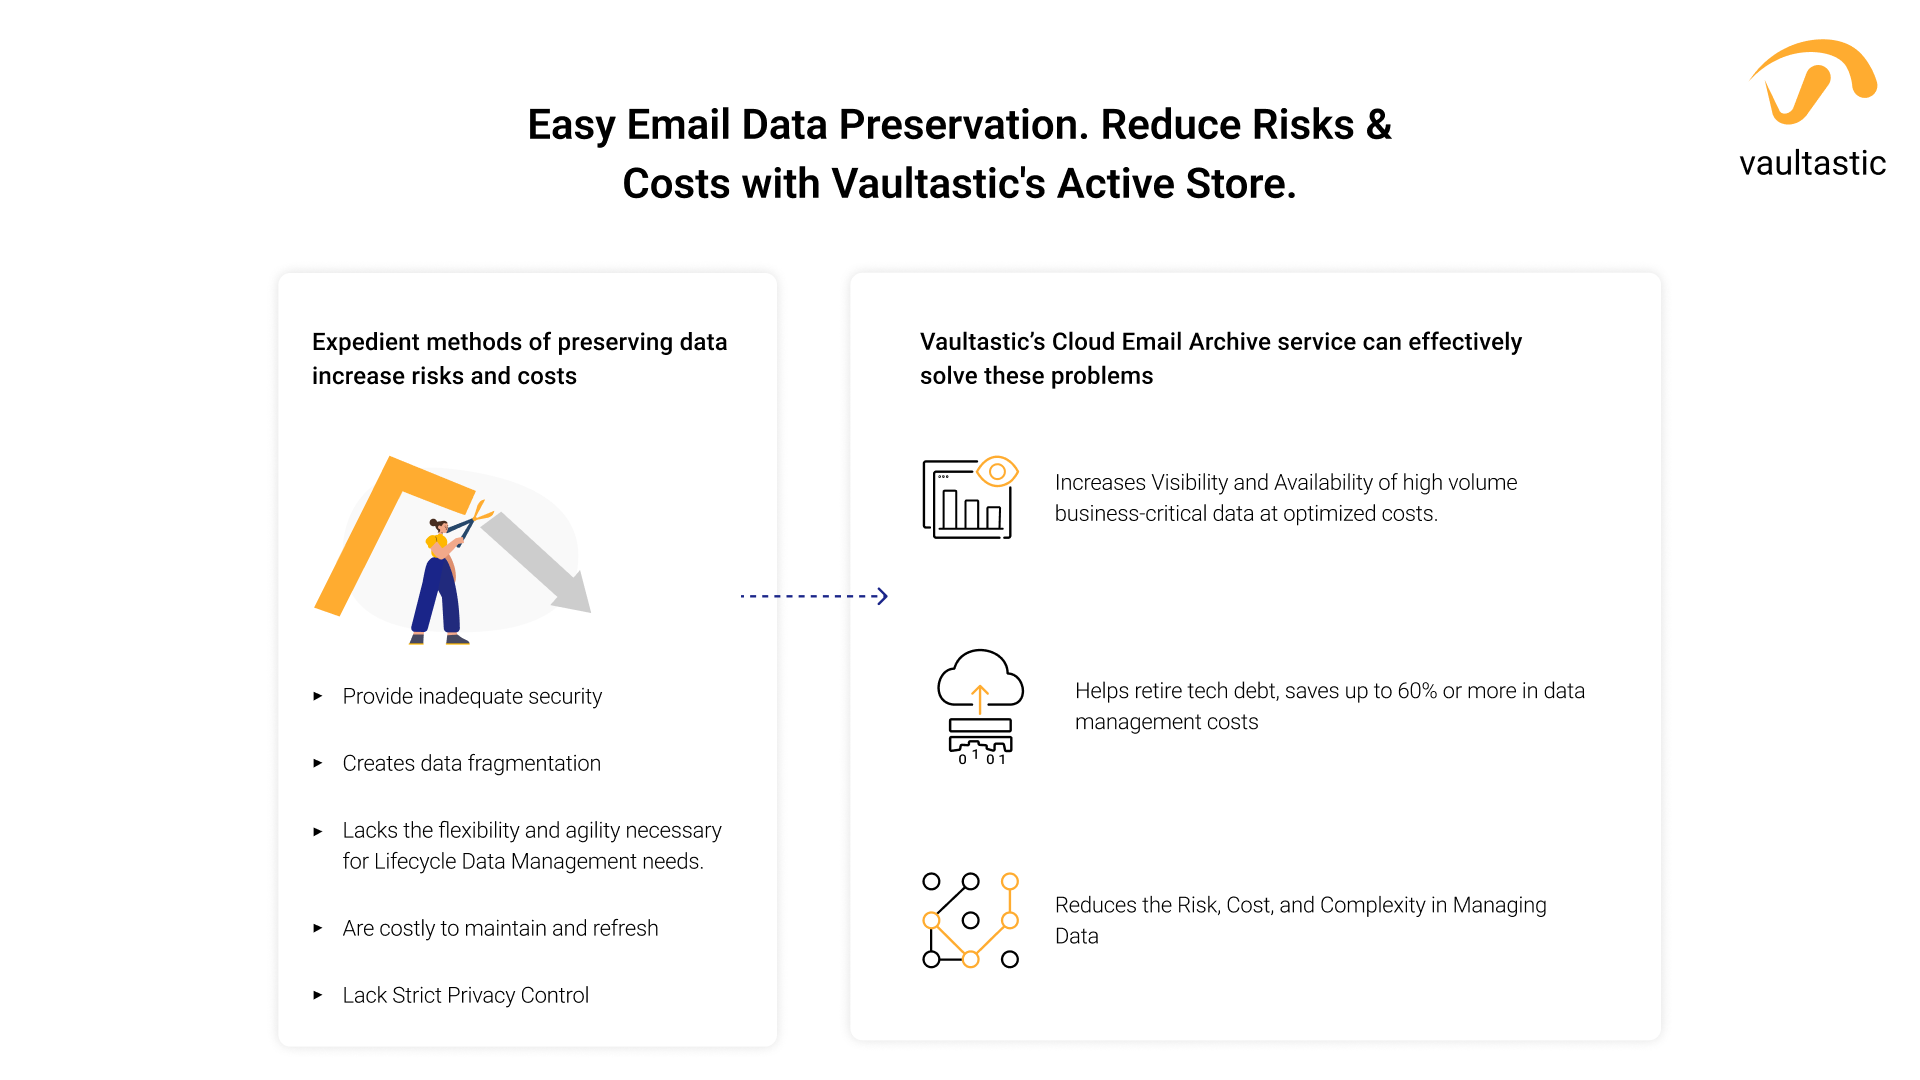 Easy email data preservation. reduce risks & costs with vaultastic's active store